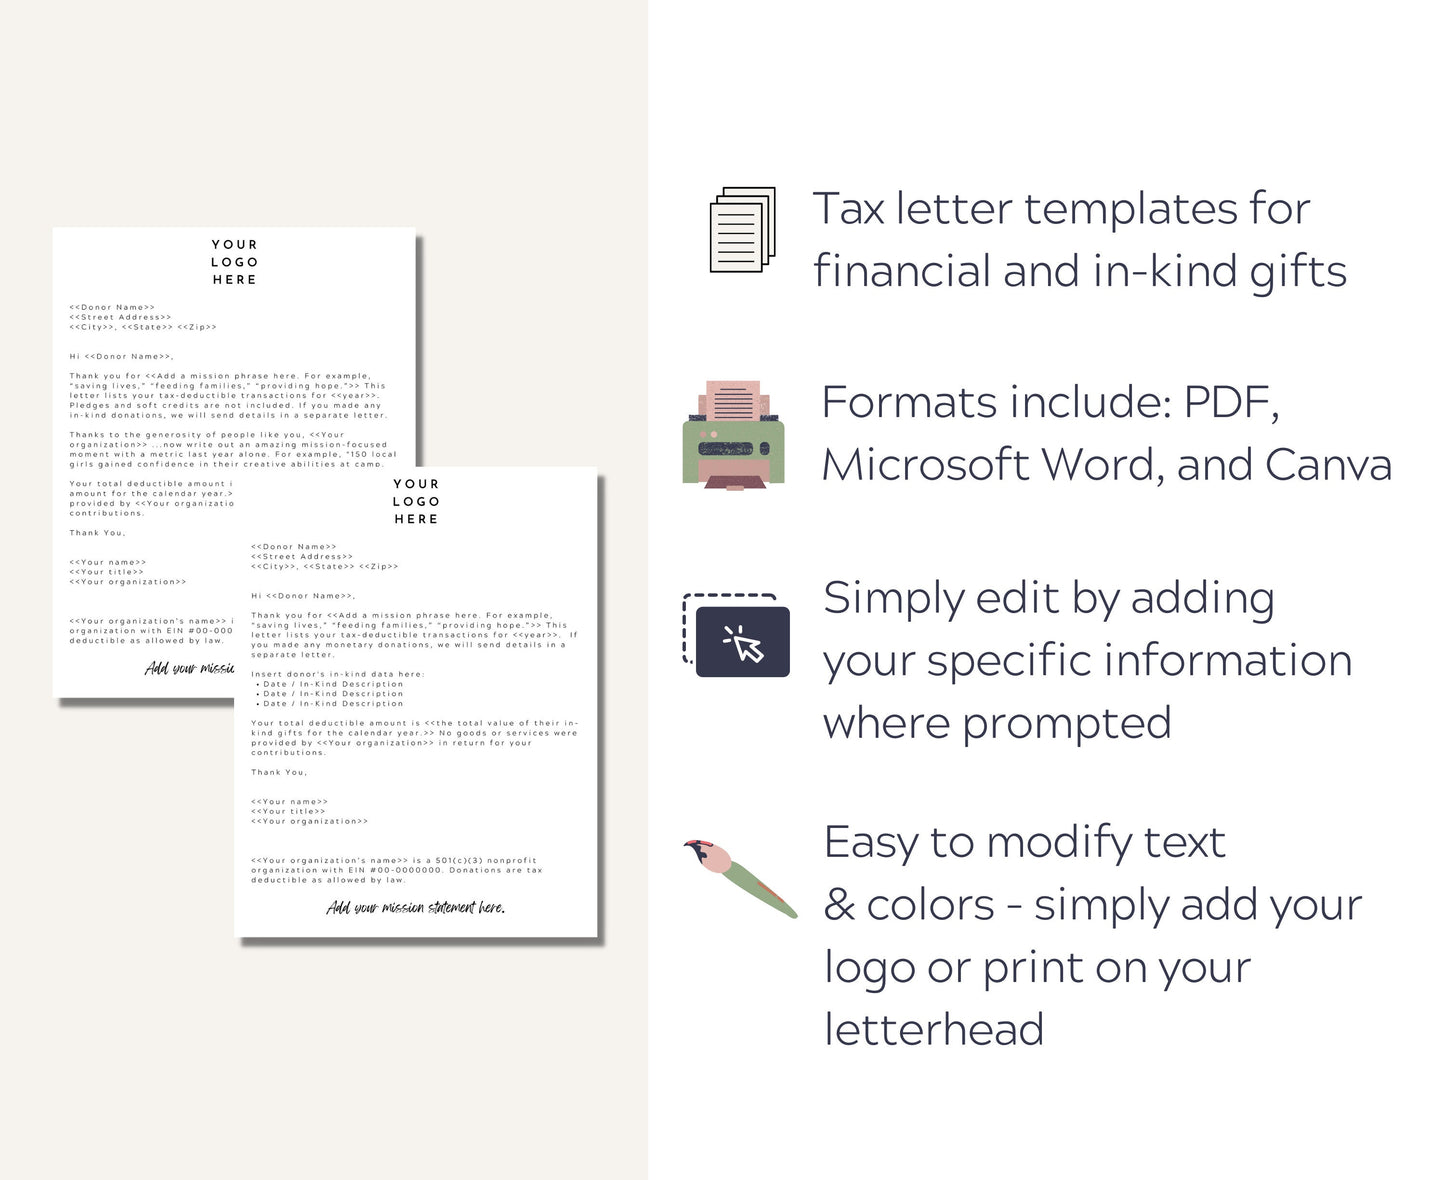 Tax Receipt Templates (In-Kind and Financial)